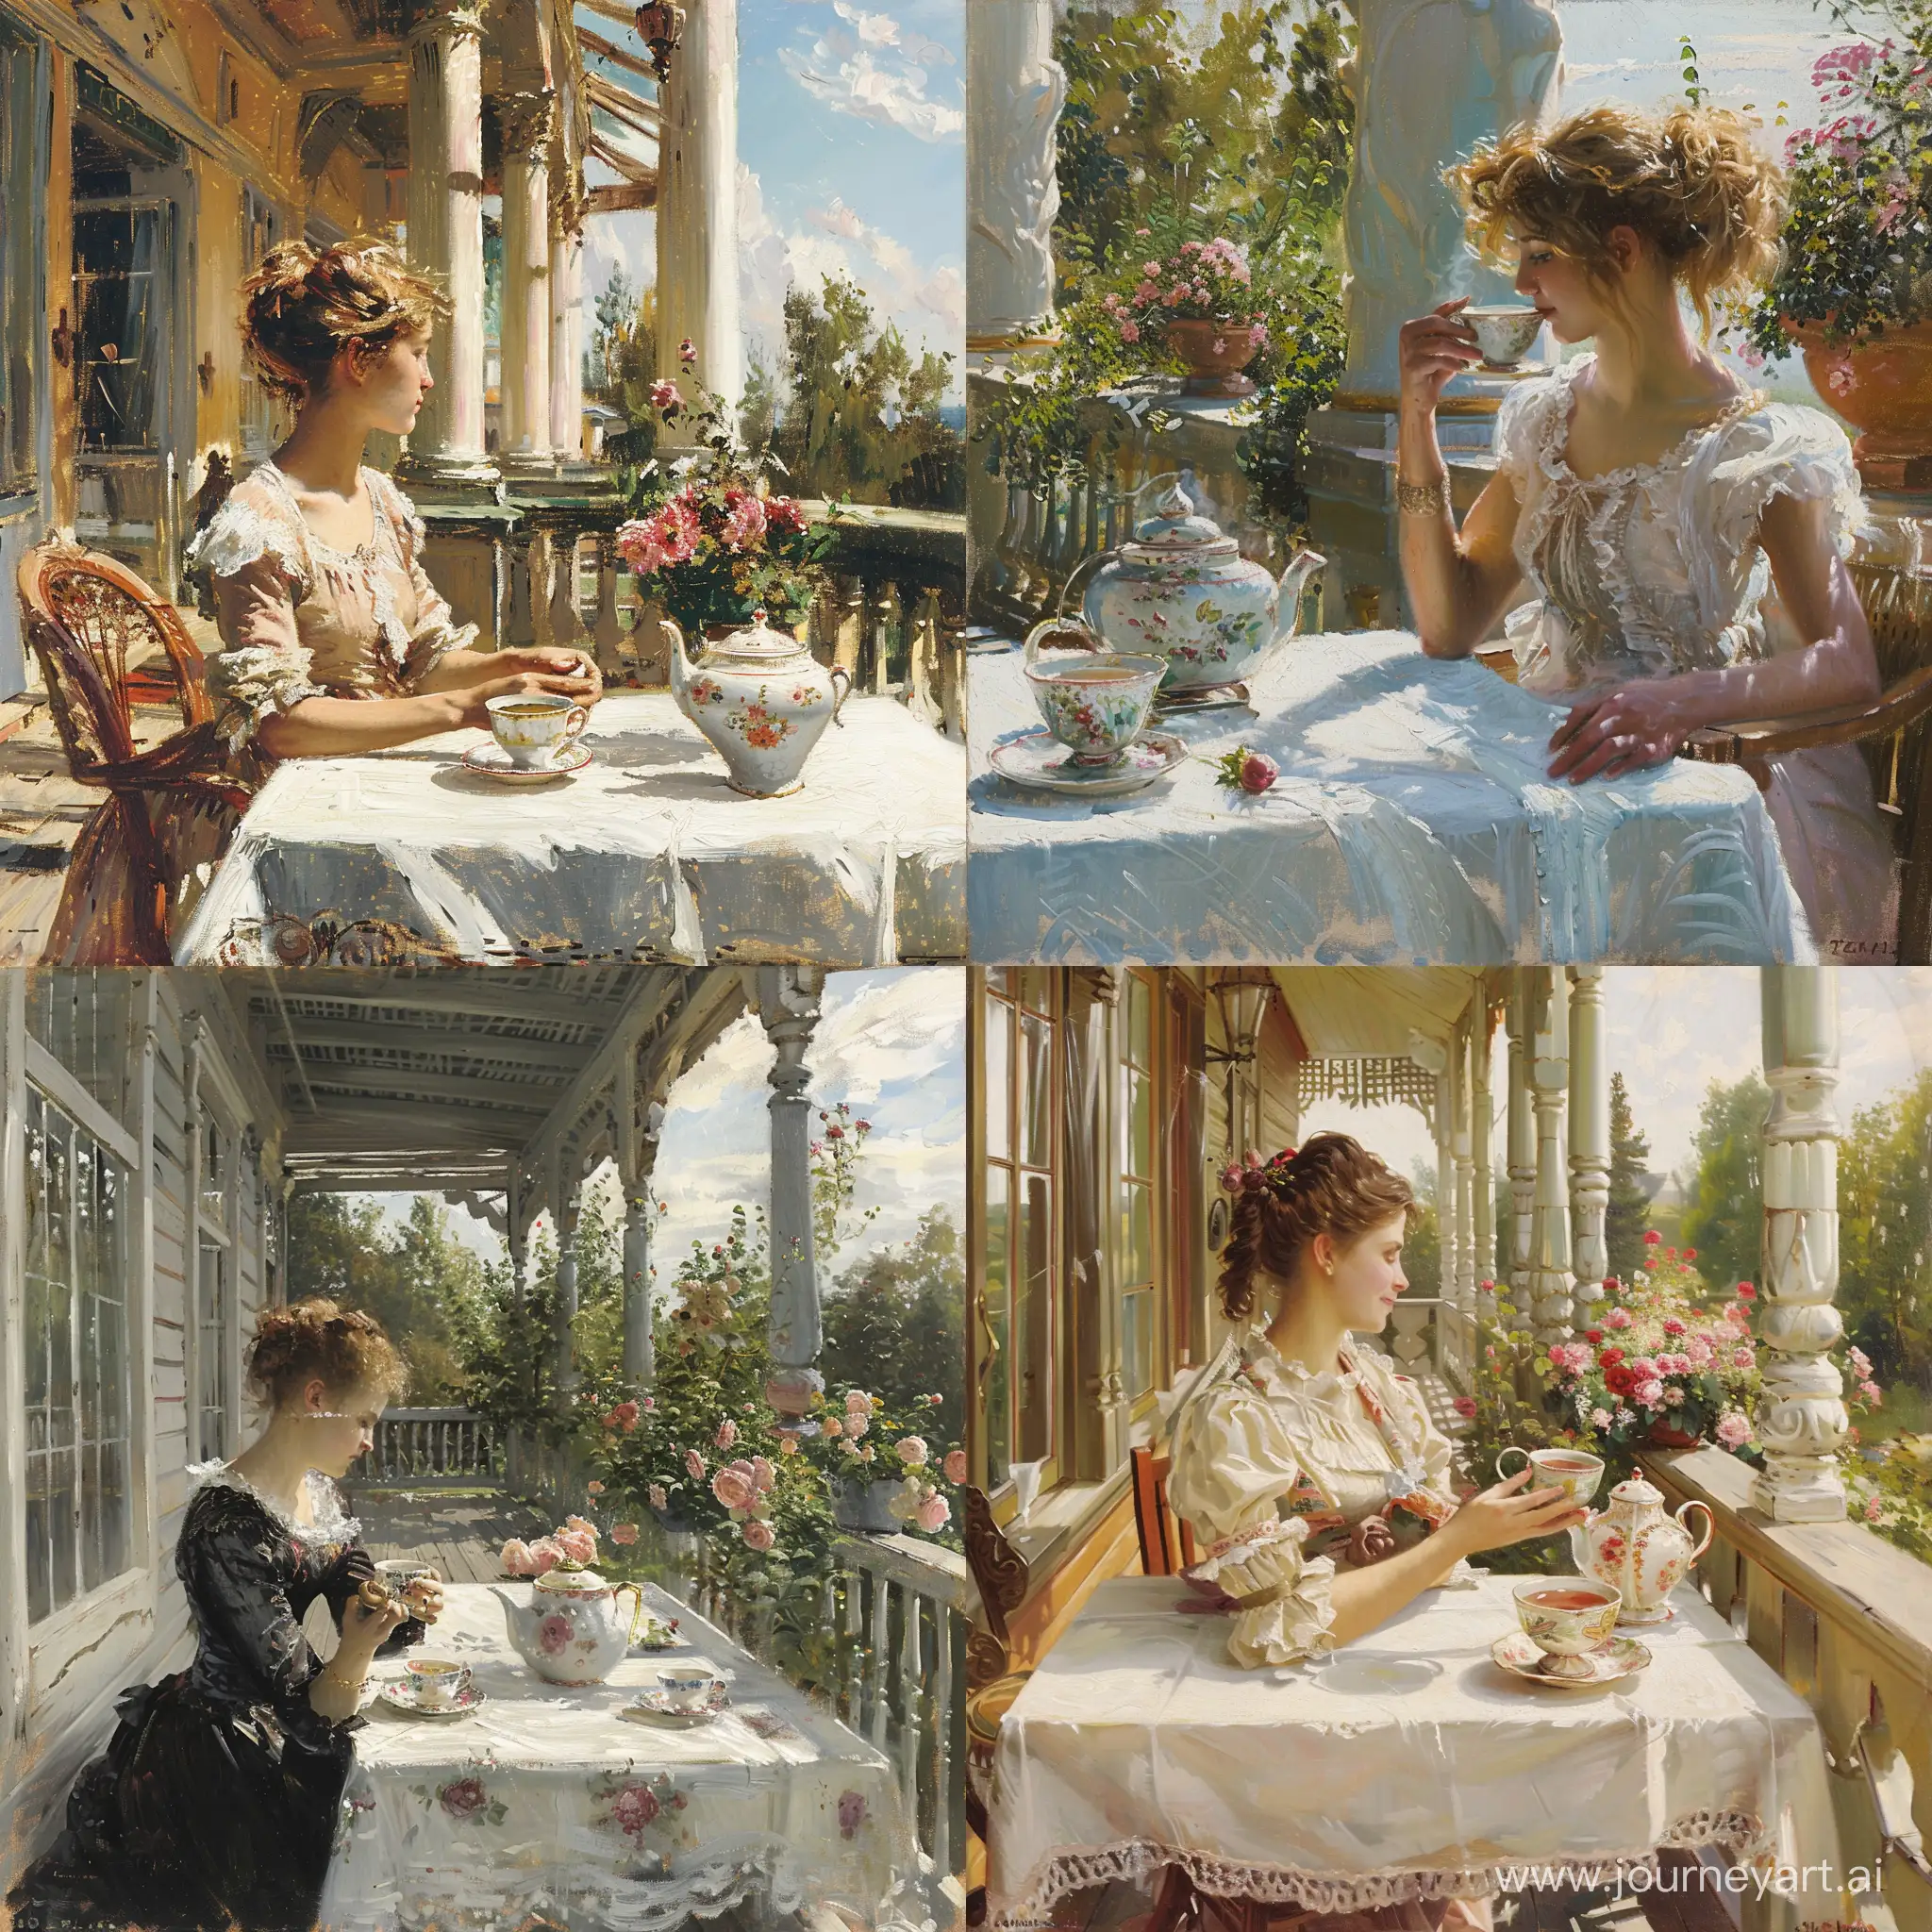 Impressionism of the XIX century in the Russian Empire. On the veranda of the estate at the table sits a woman, turned sideways, holding a cup of tea. On the table is a white tablecloth, a porcelain teapot, flowers, style raw